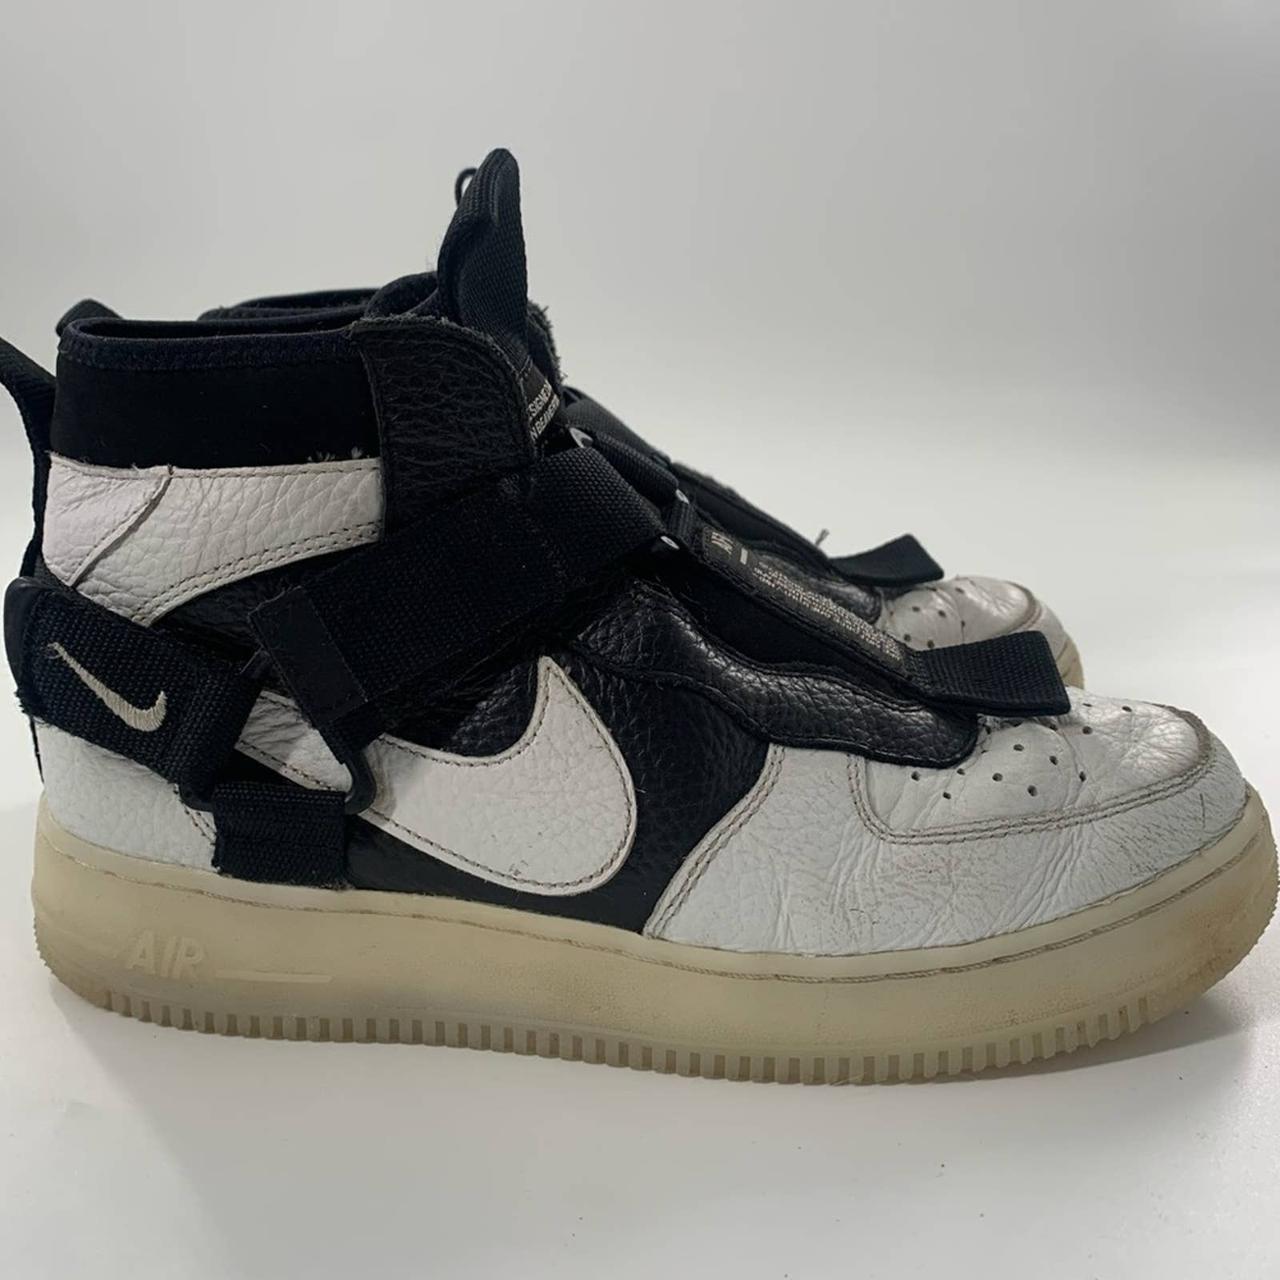 Nike Men's Air Force 1 Utility Mid Casual Shoes in White / Black Size 10.0 | Leather